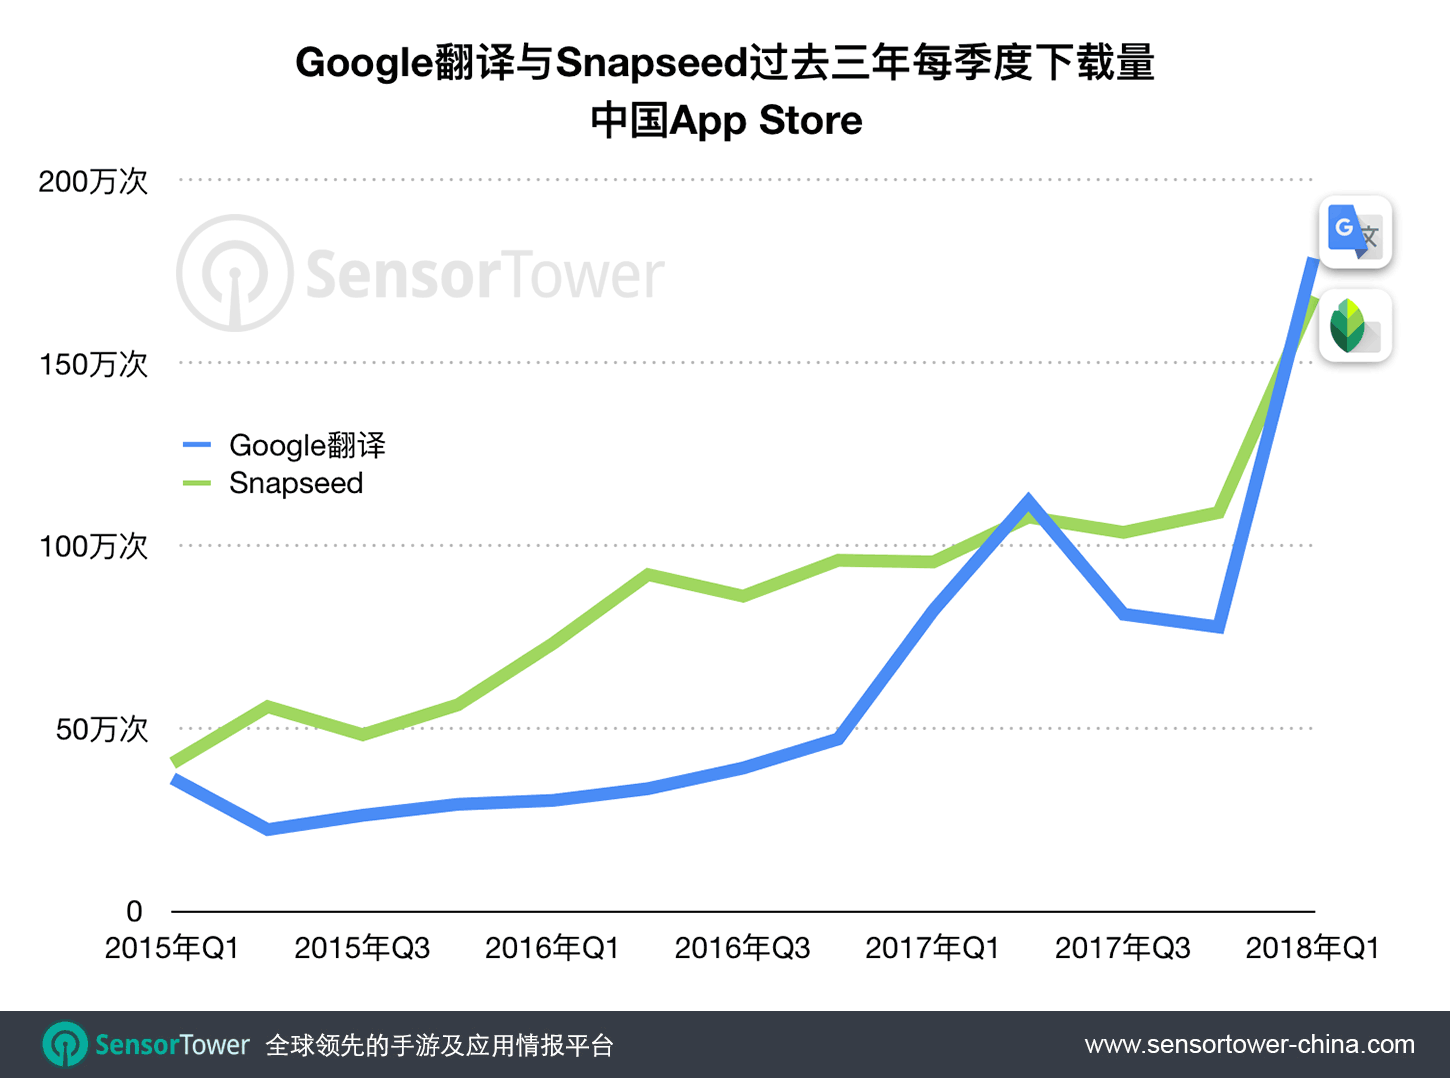 Google Translate & Snapseed Quarterly iOS Downloads in China